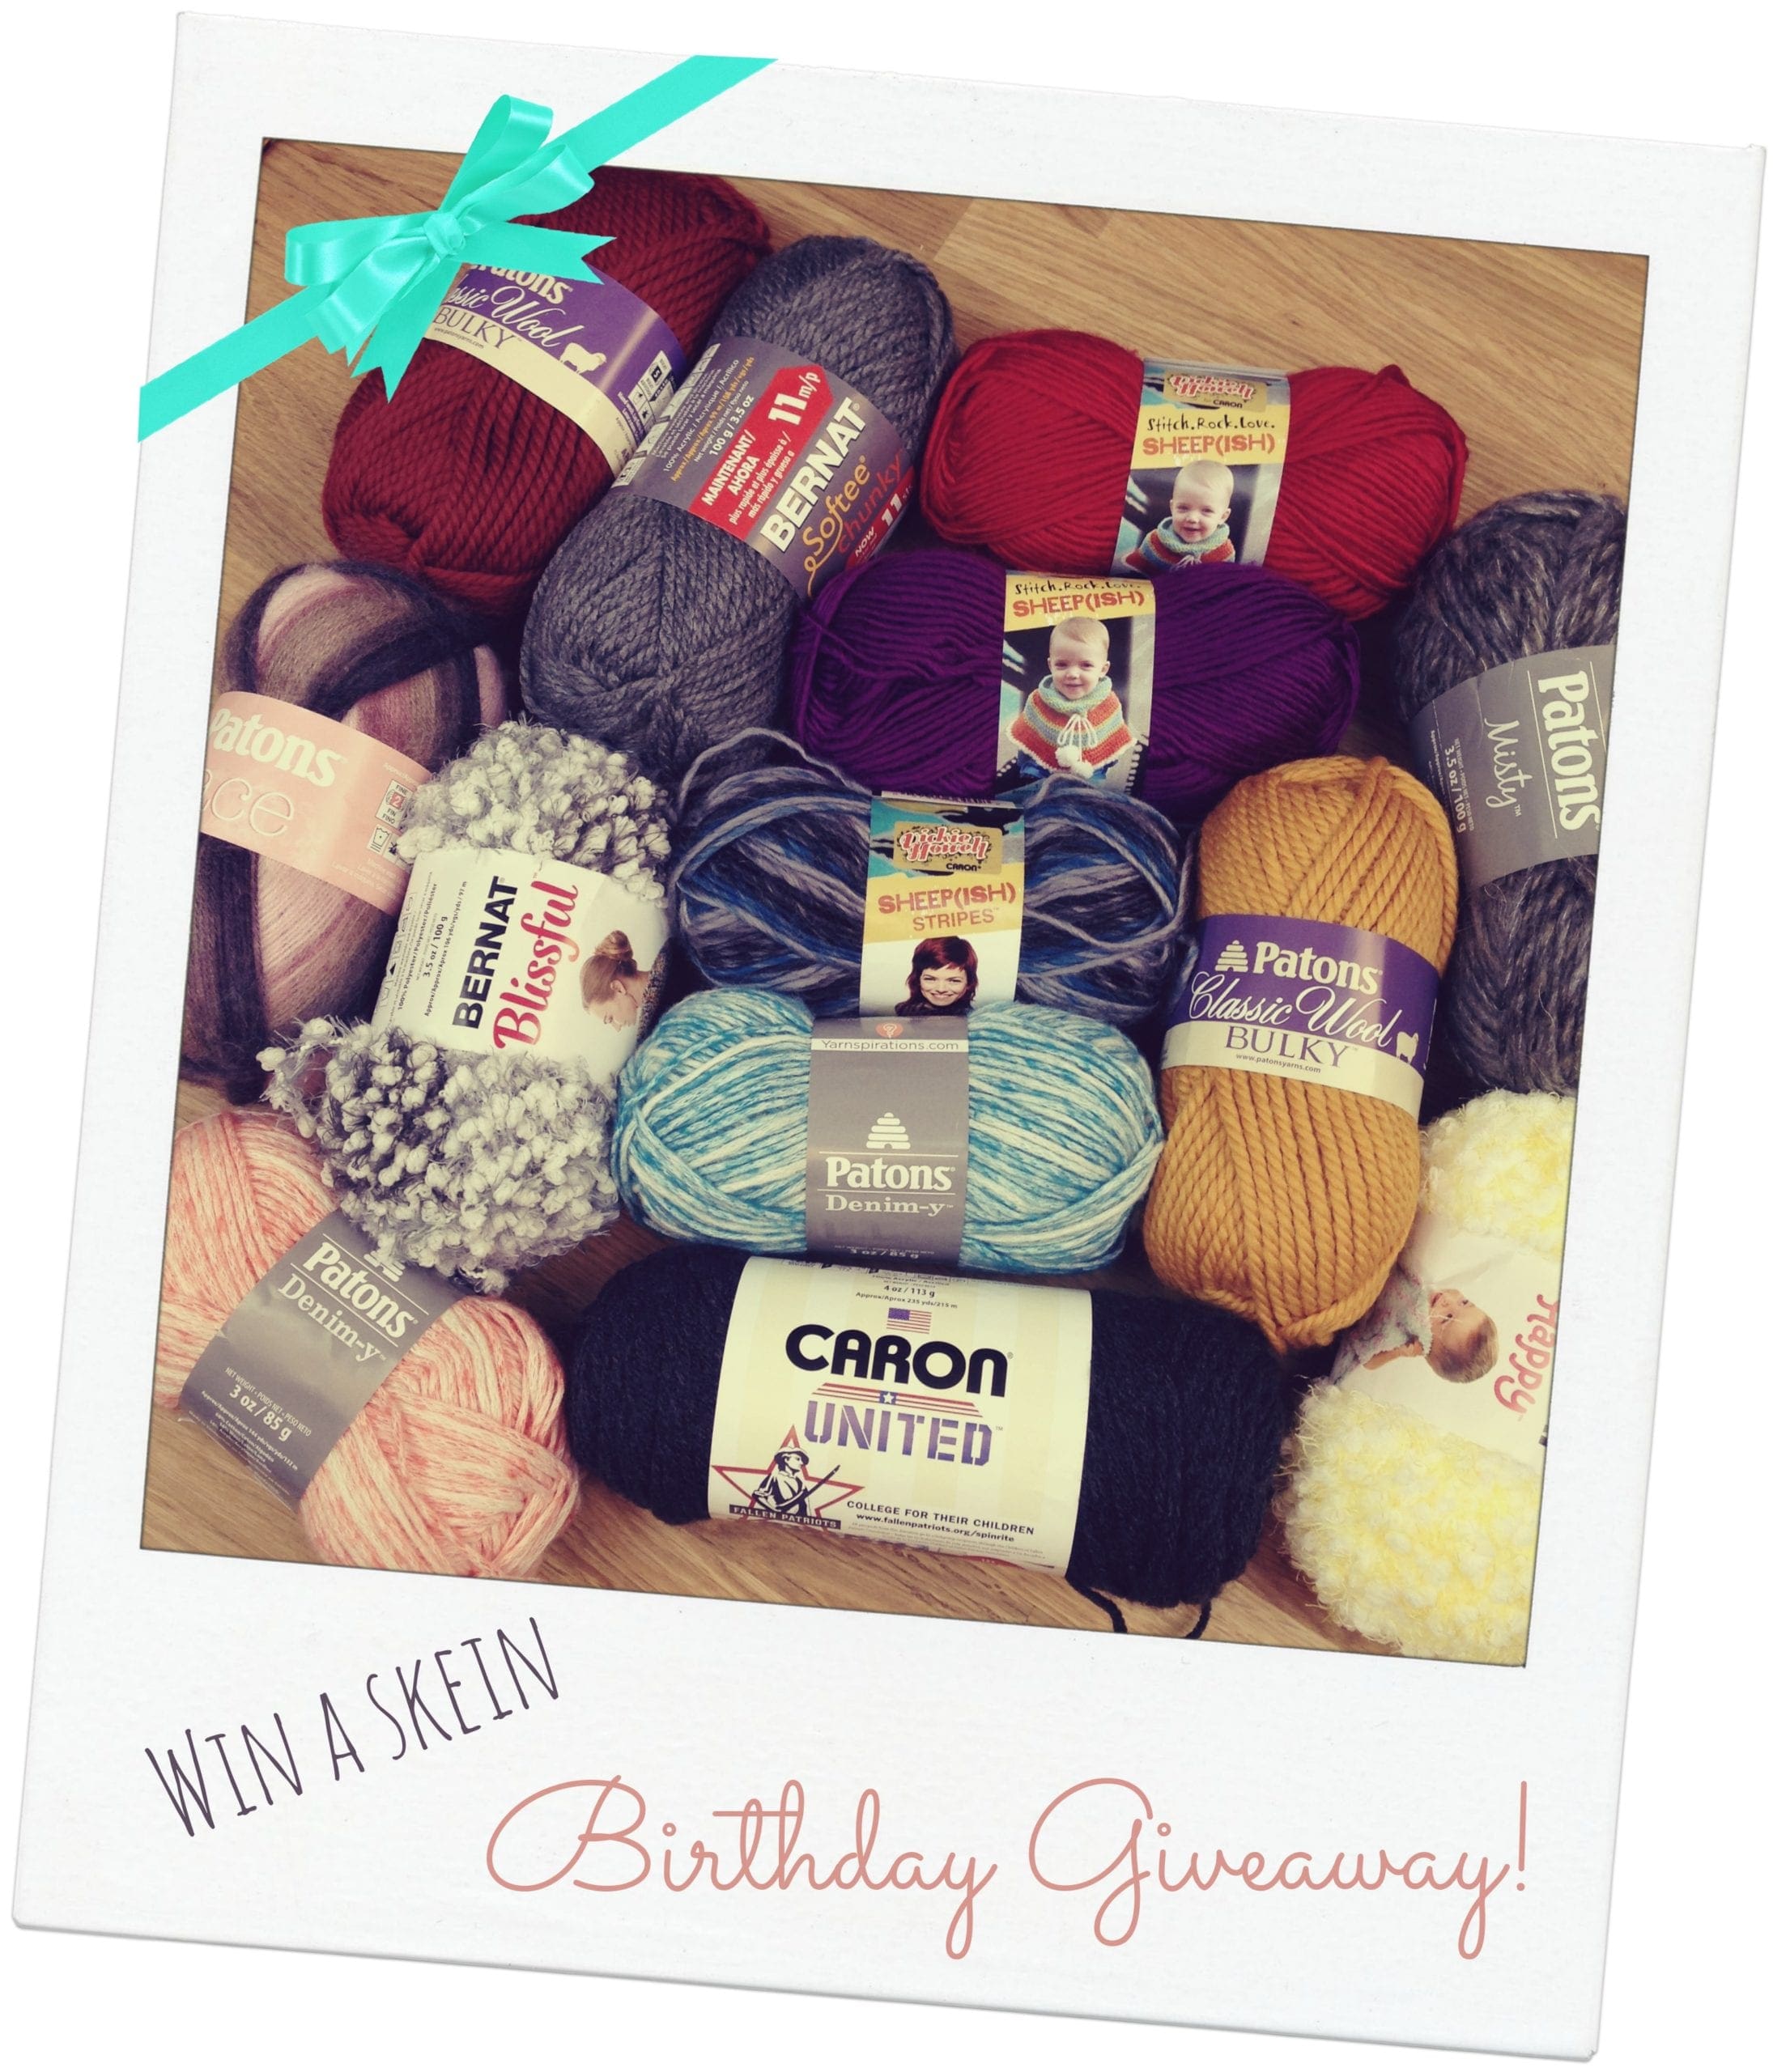 6th Annual(ish) Birthday Giveaway! - Vickie Howell